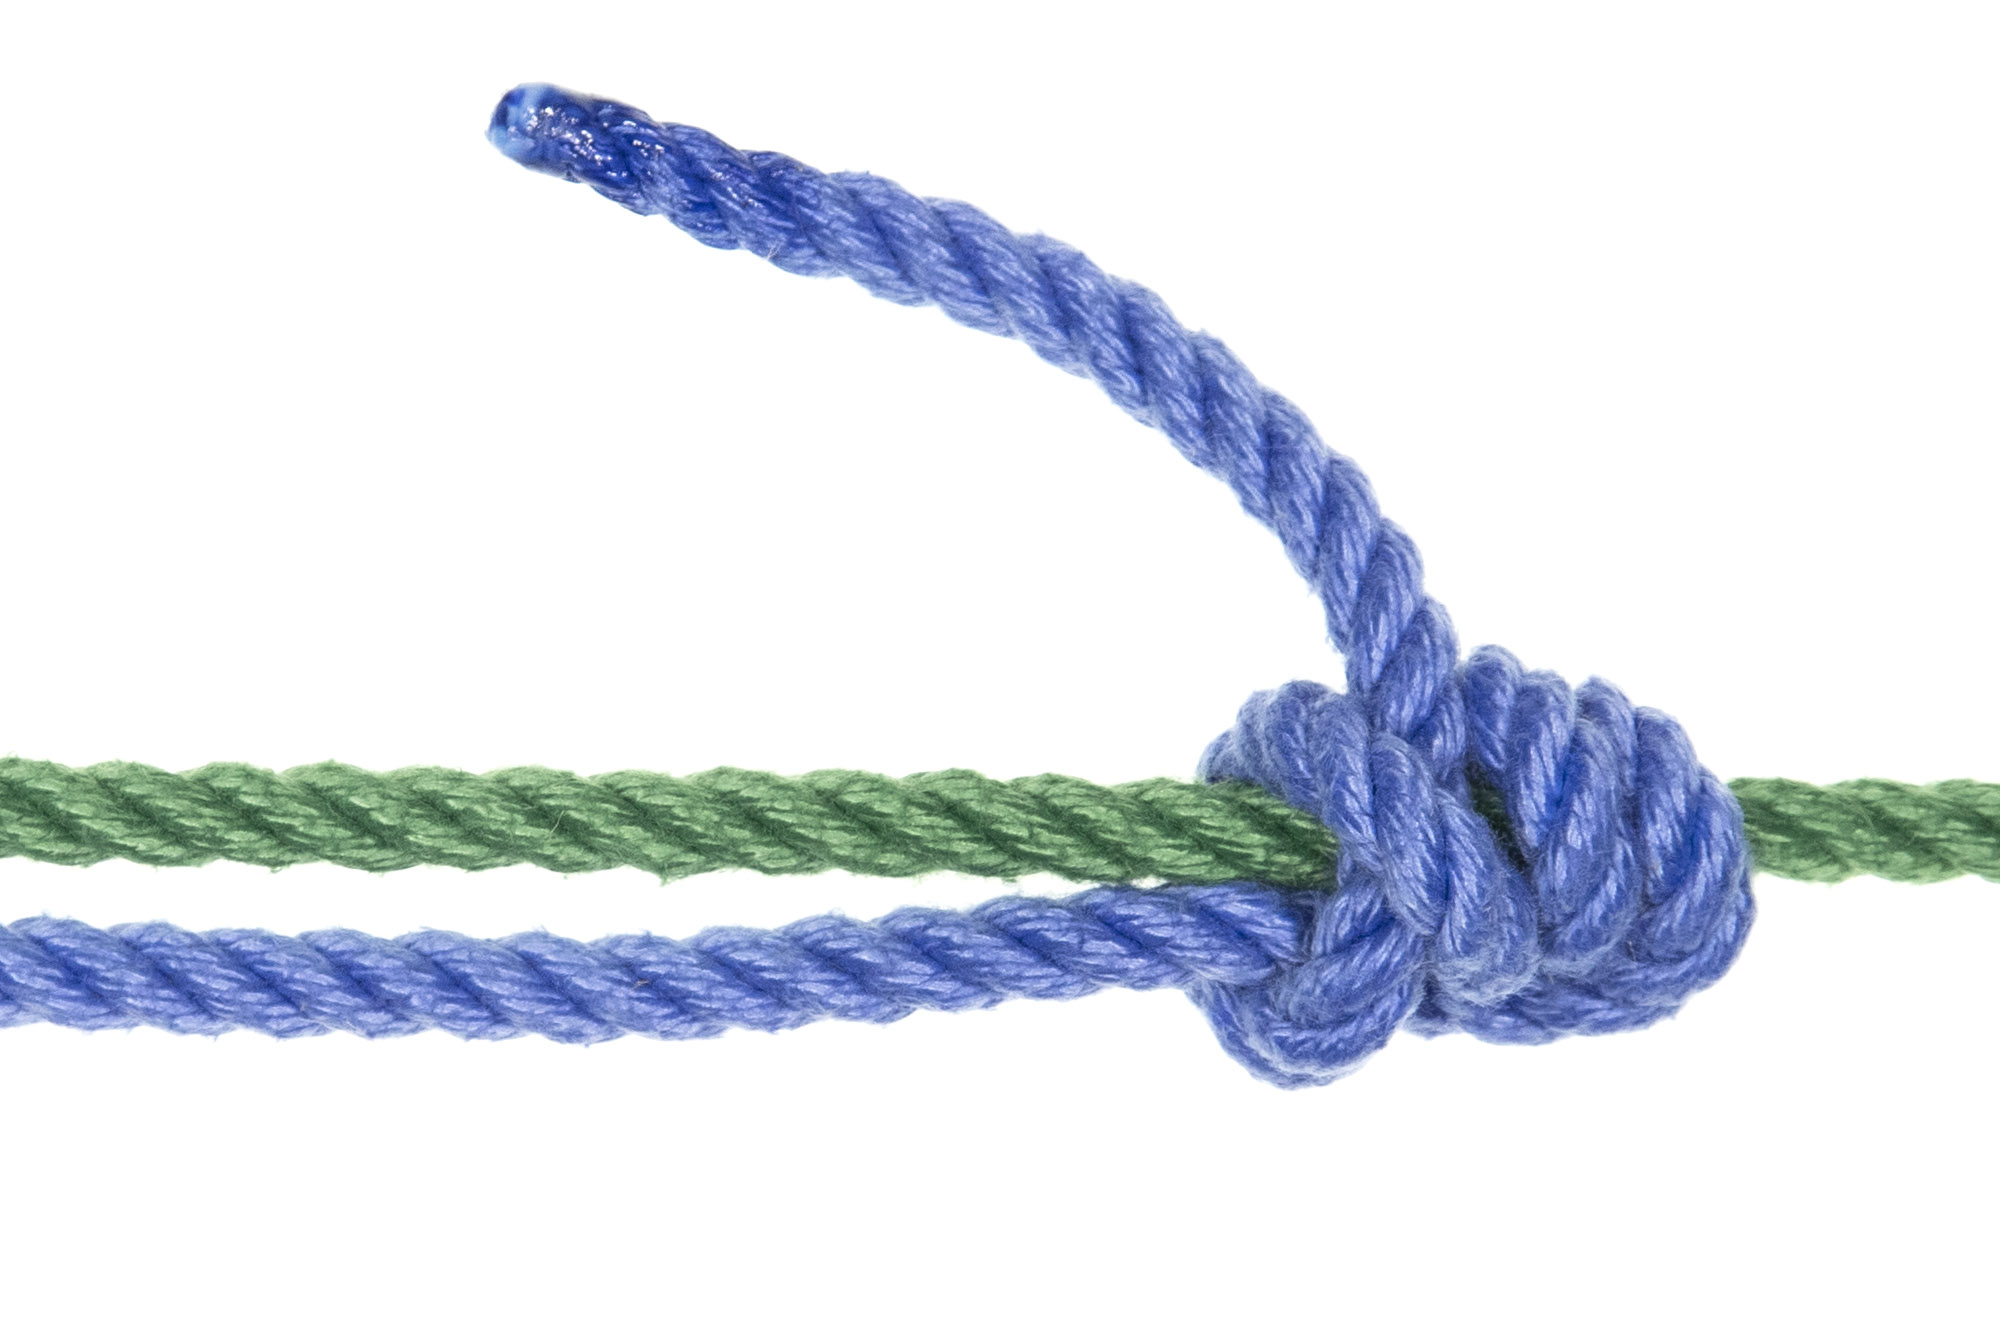 A green rope crosses the frame horizontally. A blue rope enters the frame from the left and runs alongside the green rope, just below it. It is tied to the green rope with an adjustable grip hitch consisting of two tight spirals around the green rope and a half hitch on the left side of the spirals. The knot has been pulled into a neat, compact shape.